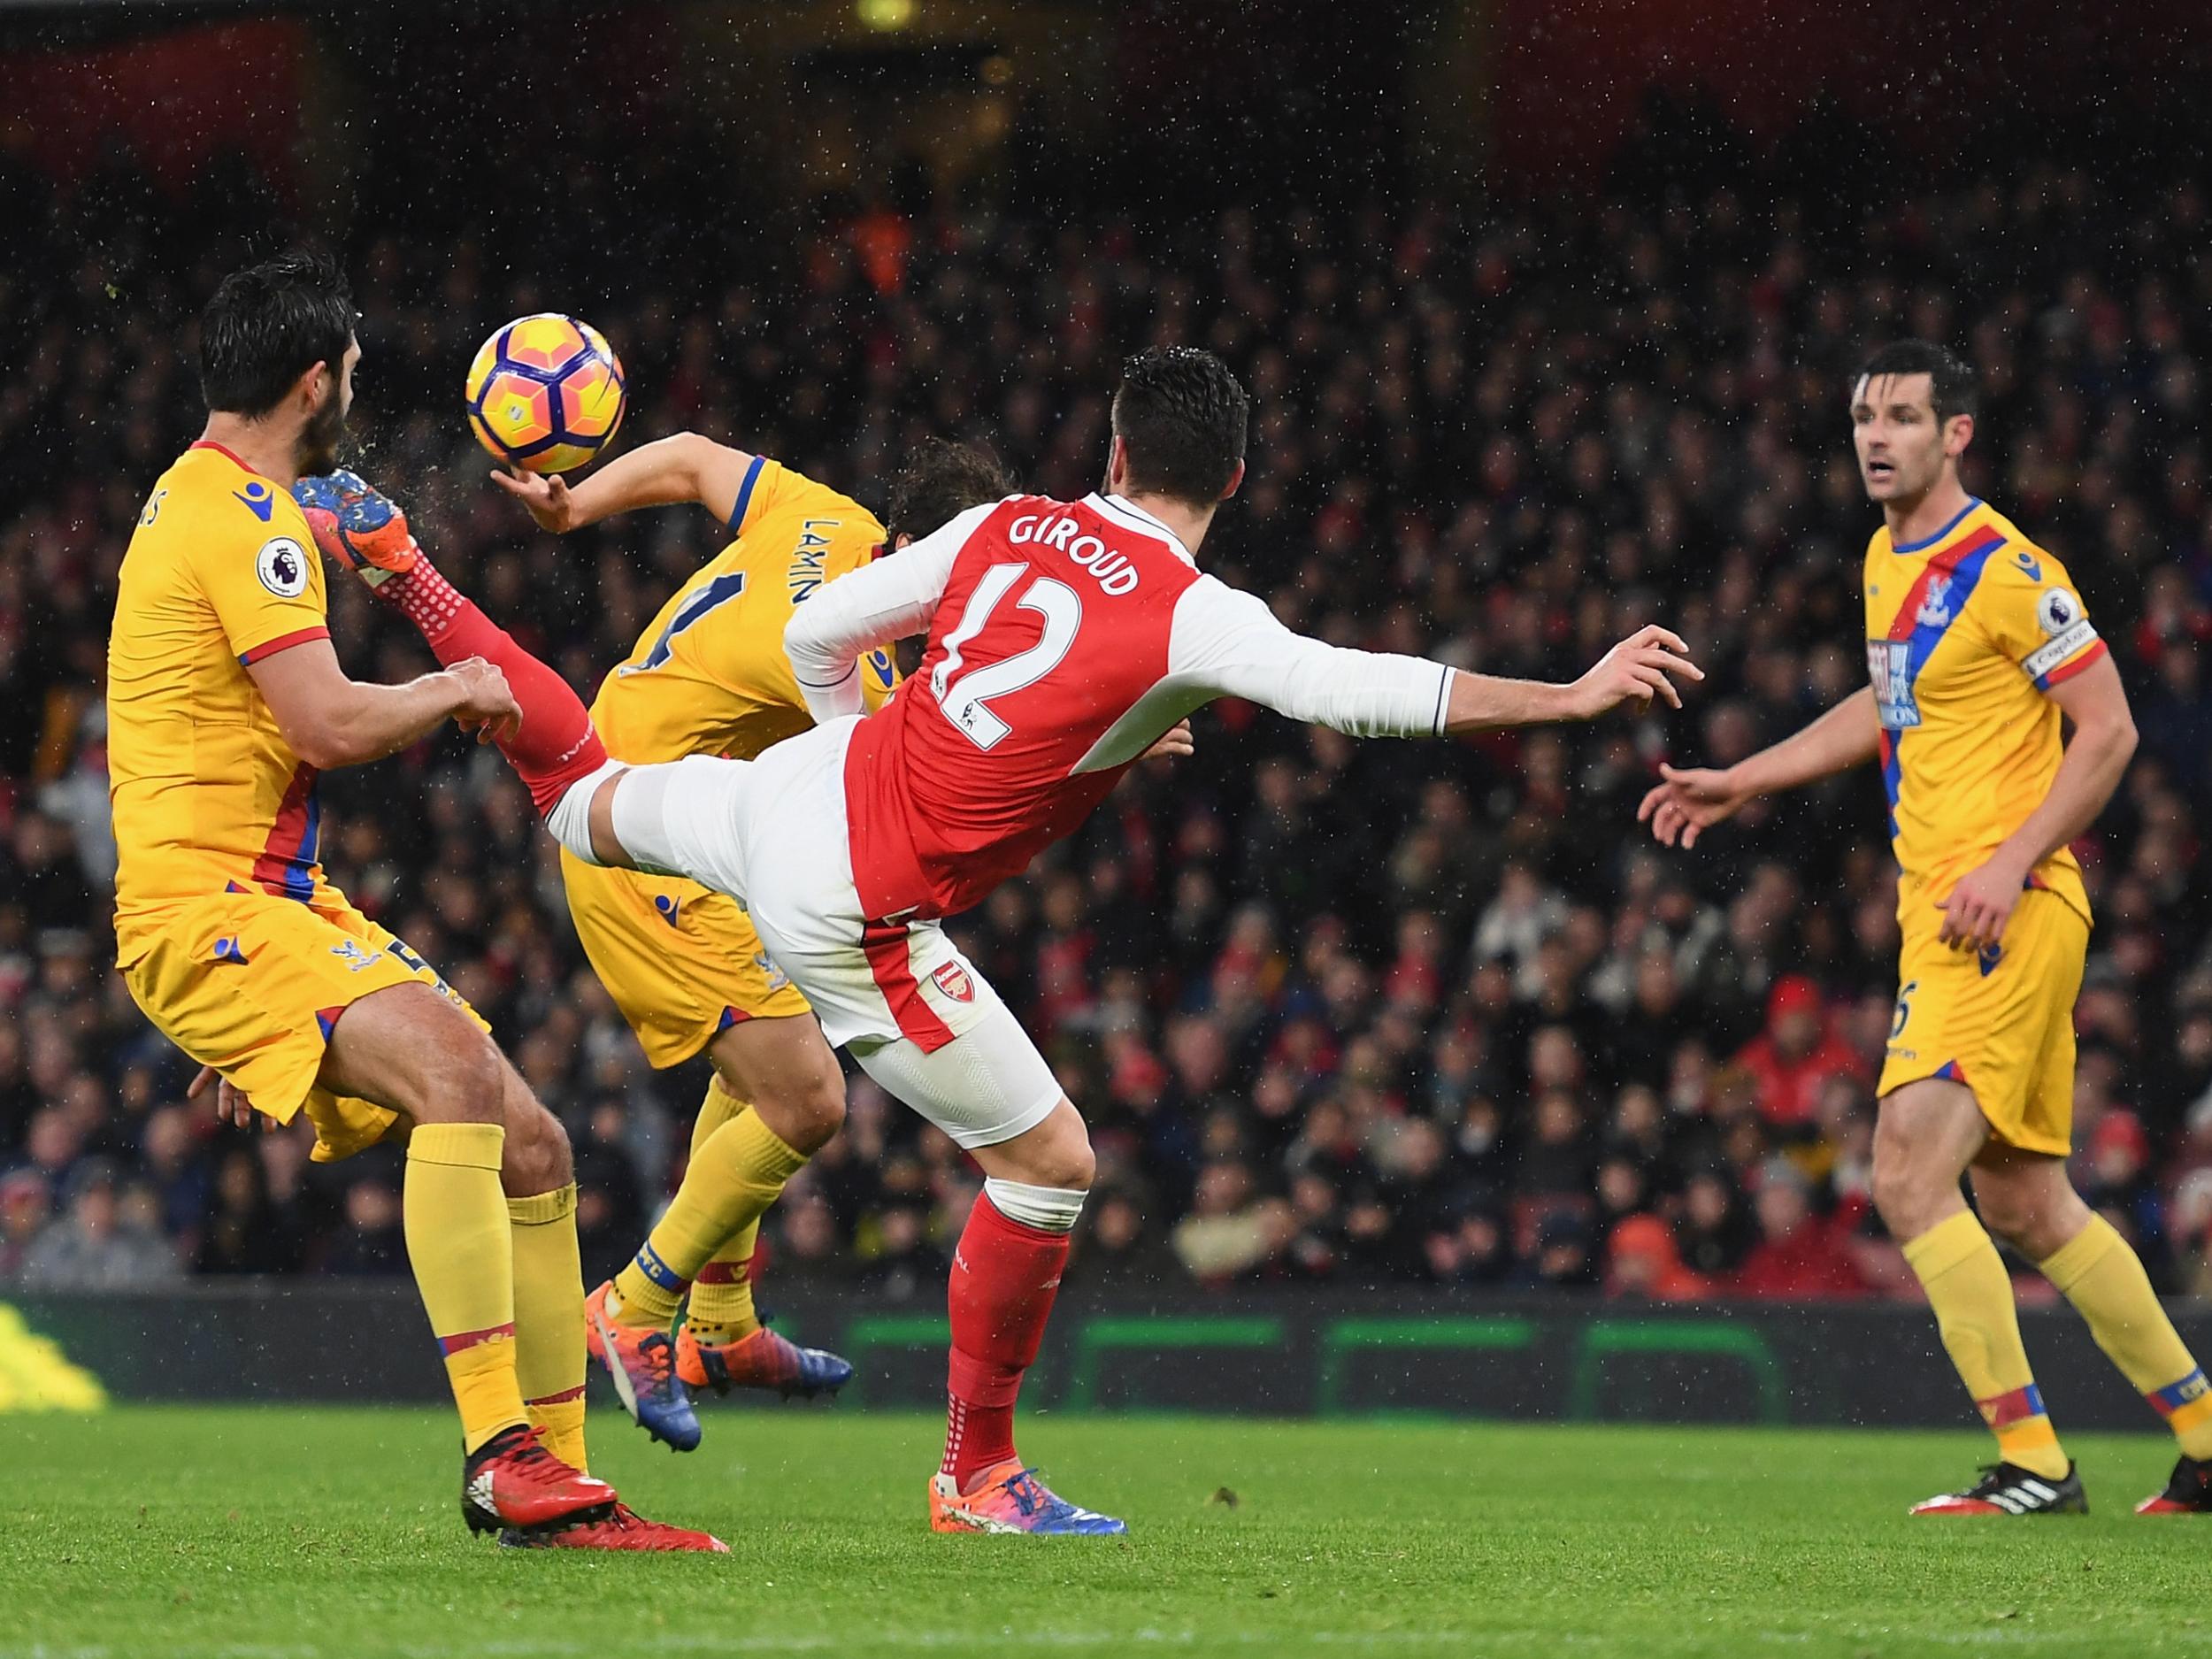 Giroud's scorpion kick was watched around the world - but didn't win the award